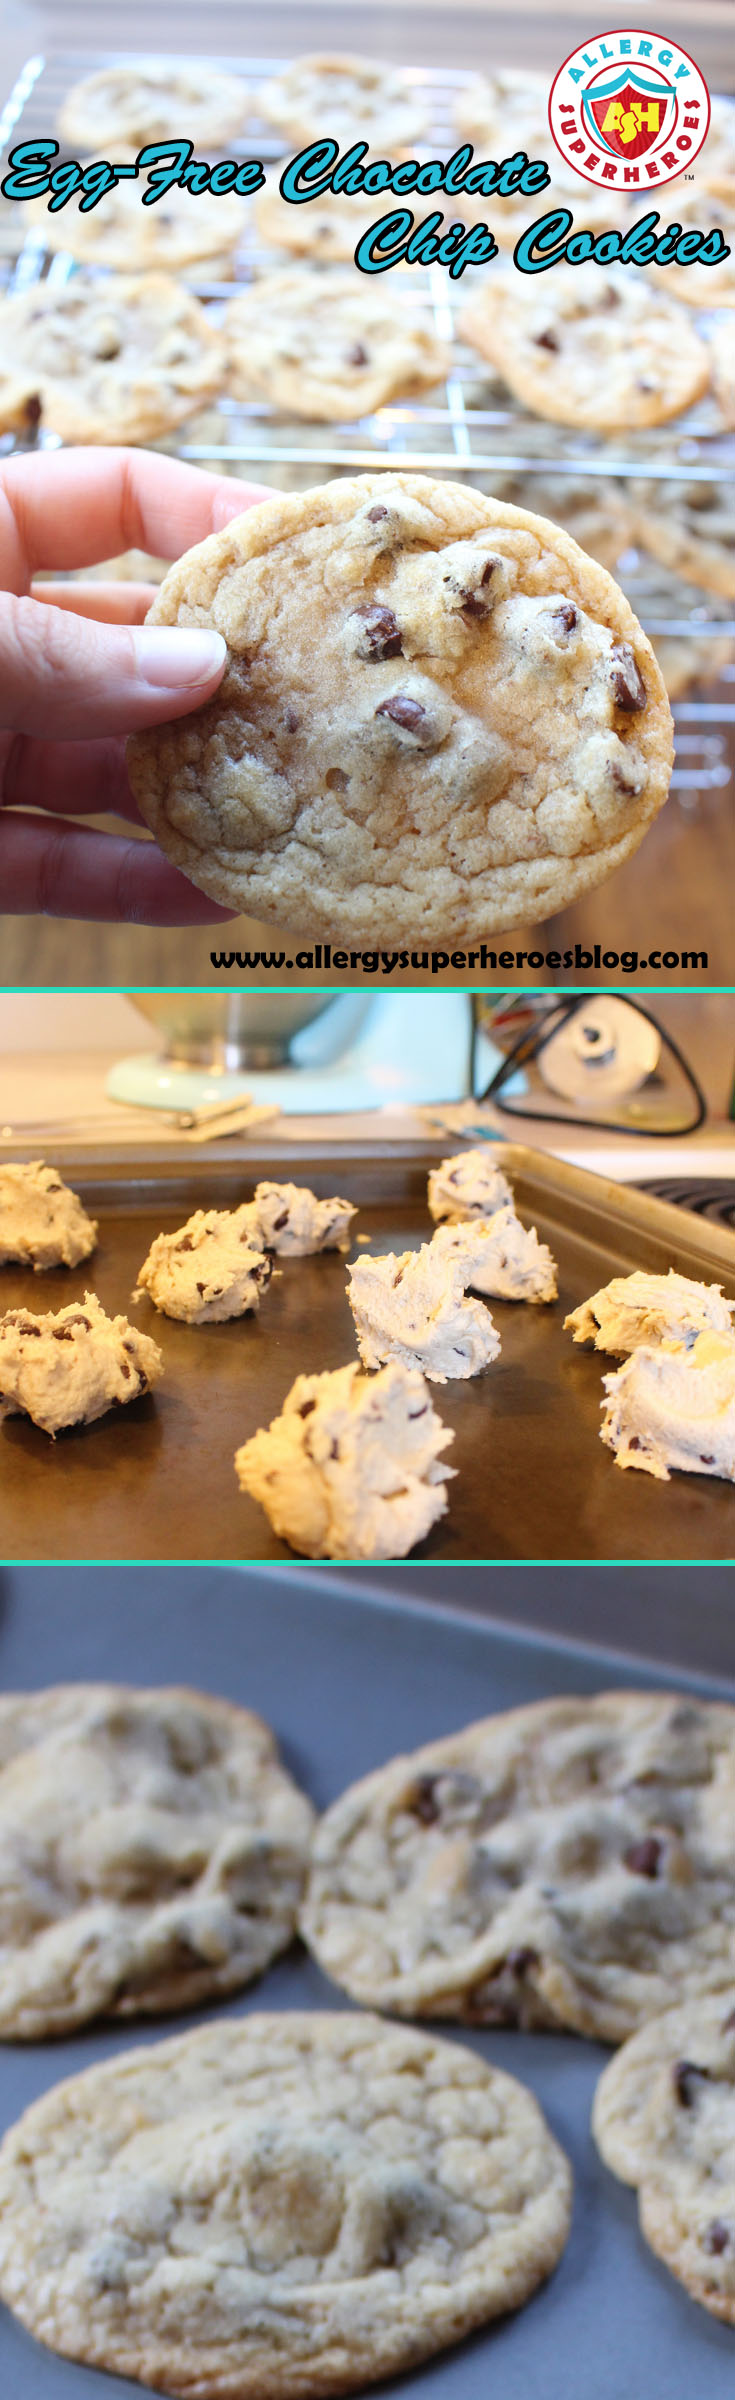 Yummy Egg Free Chocolate Chip Cookies | Food Allergy Superheroes